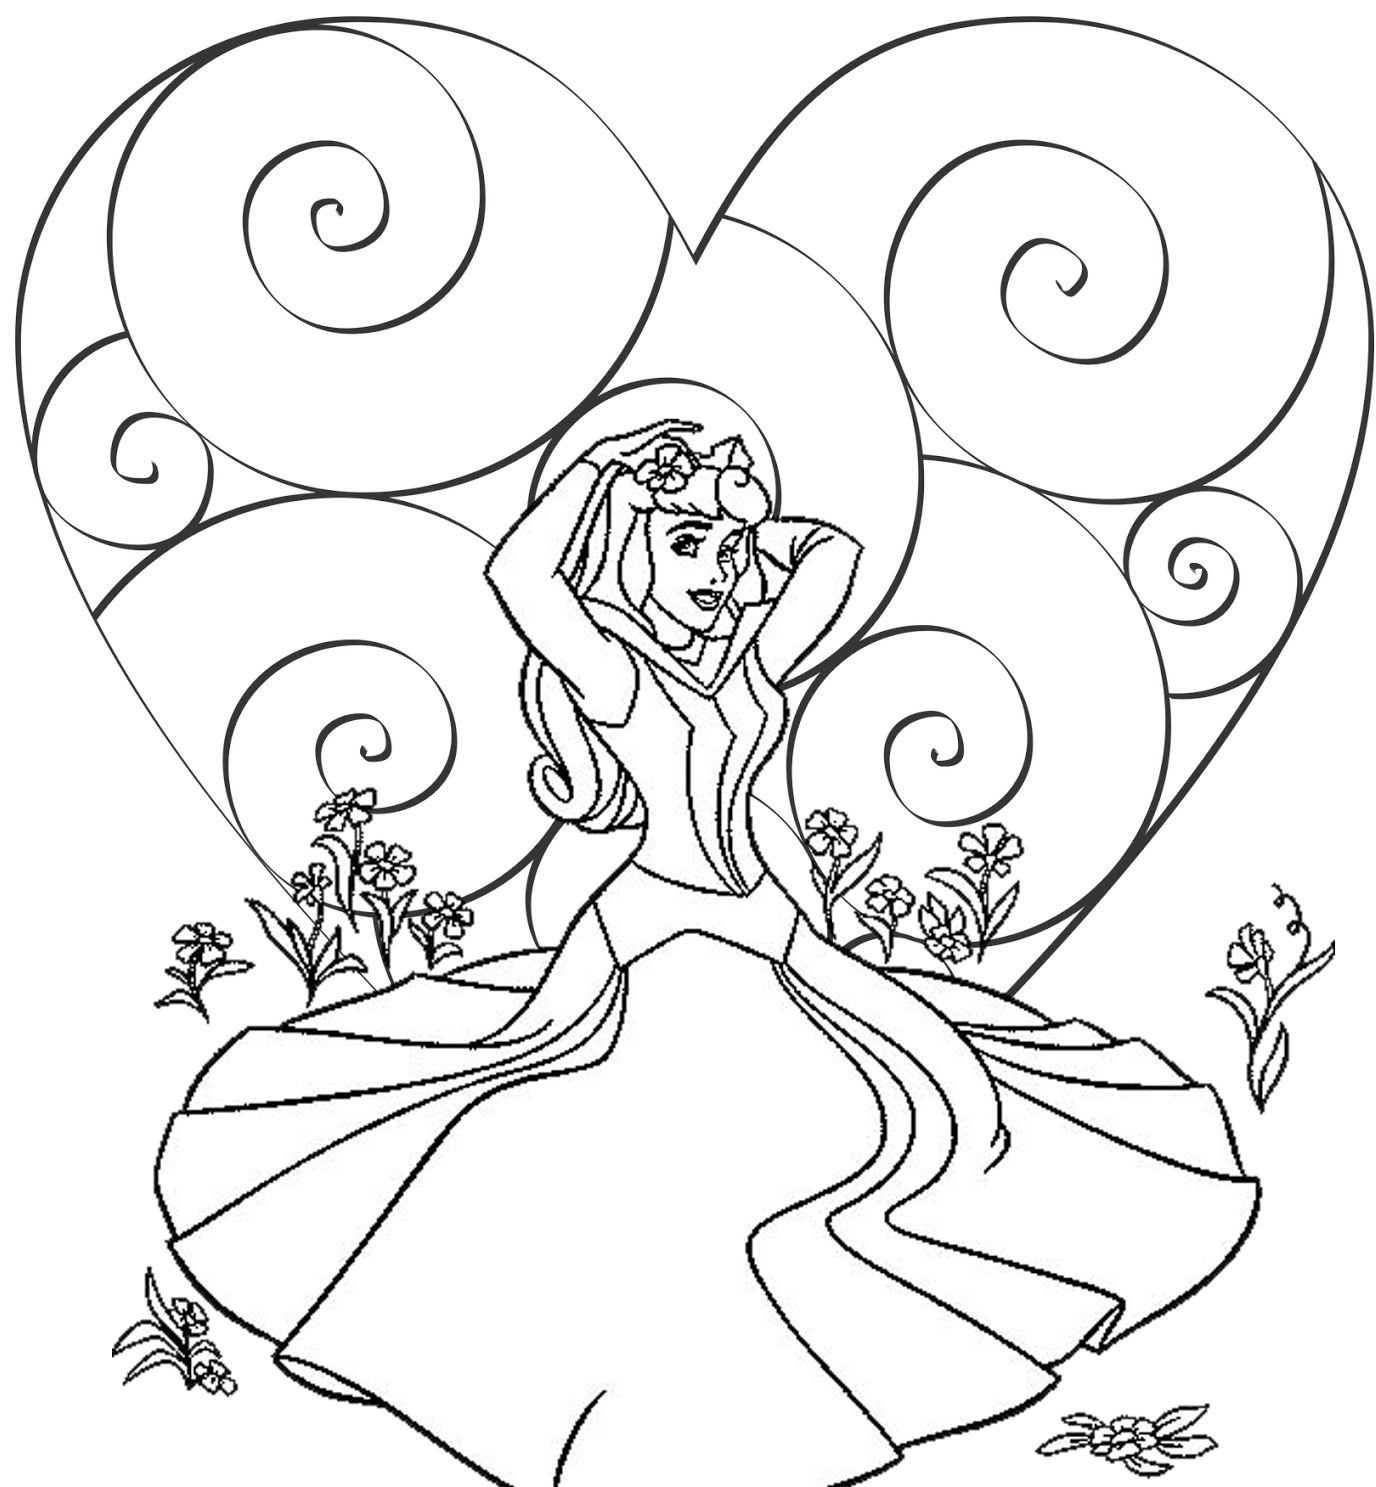 Coloring Pages Disney Princess Collection - Coloring Pages For All ...